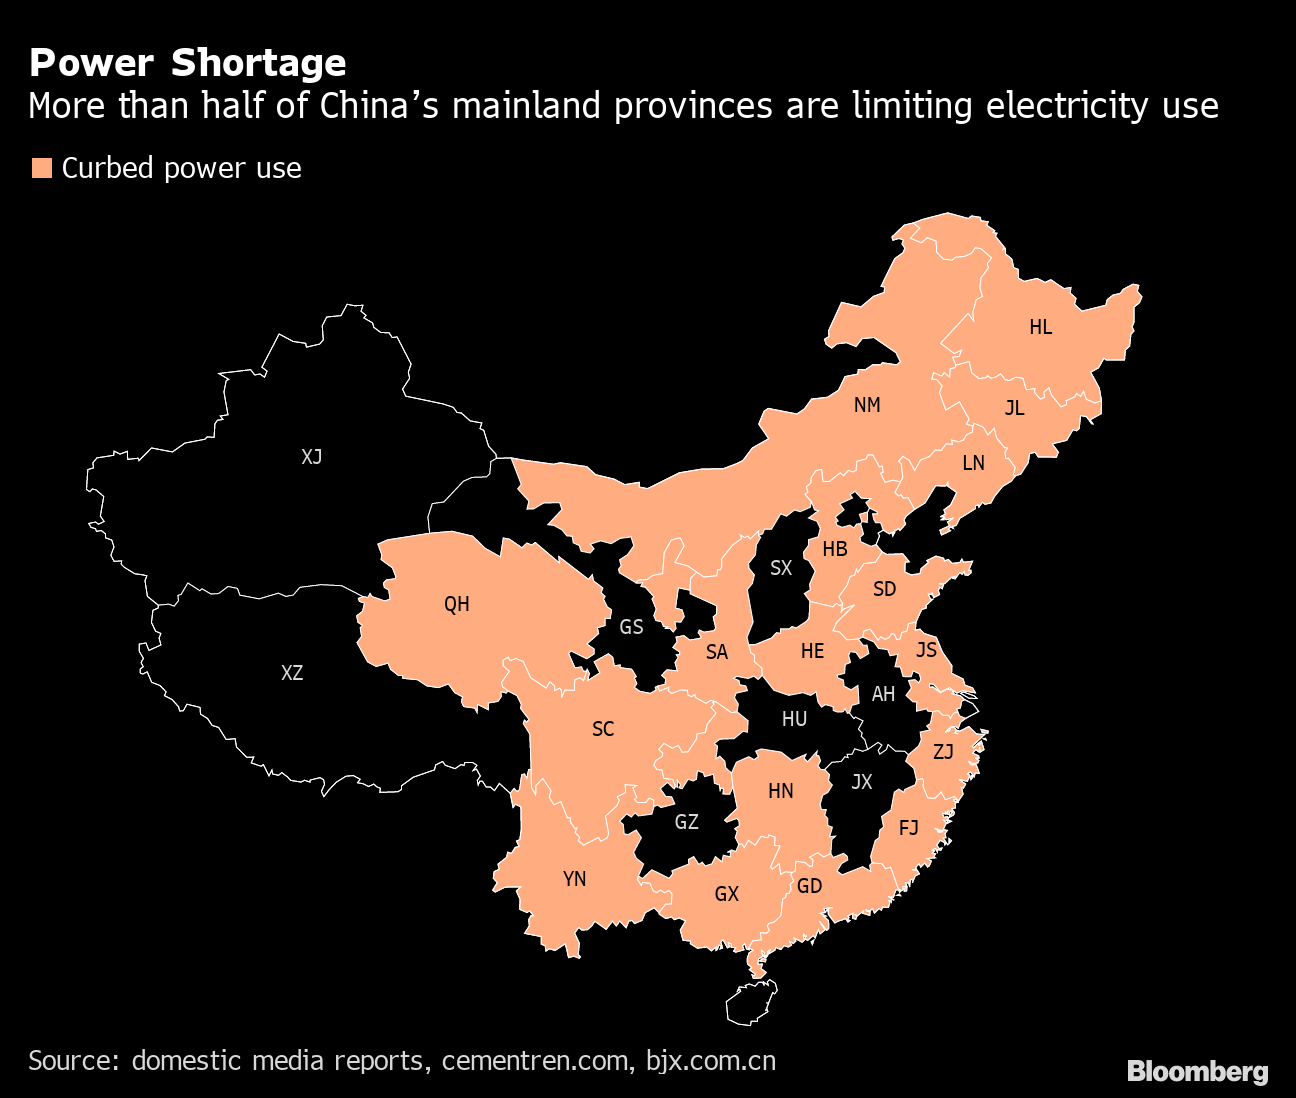 Supply Chains Threatened as Energy Crisis Curbs China Factories - Bloomberg